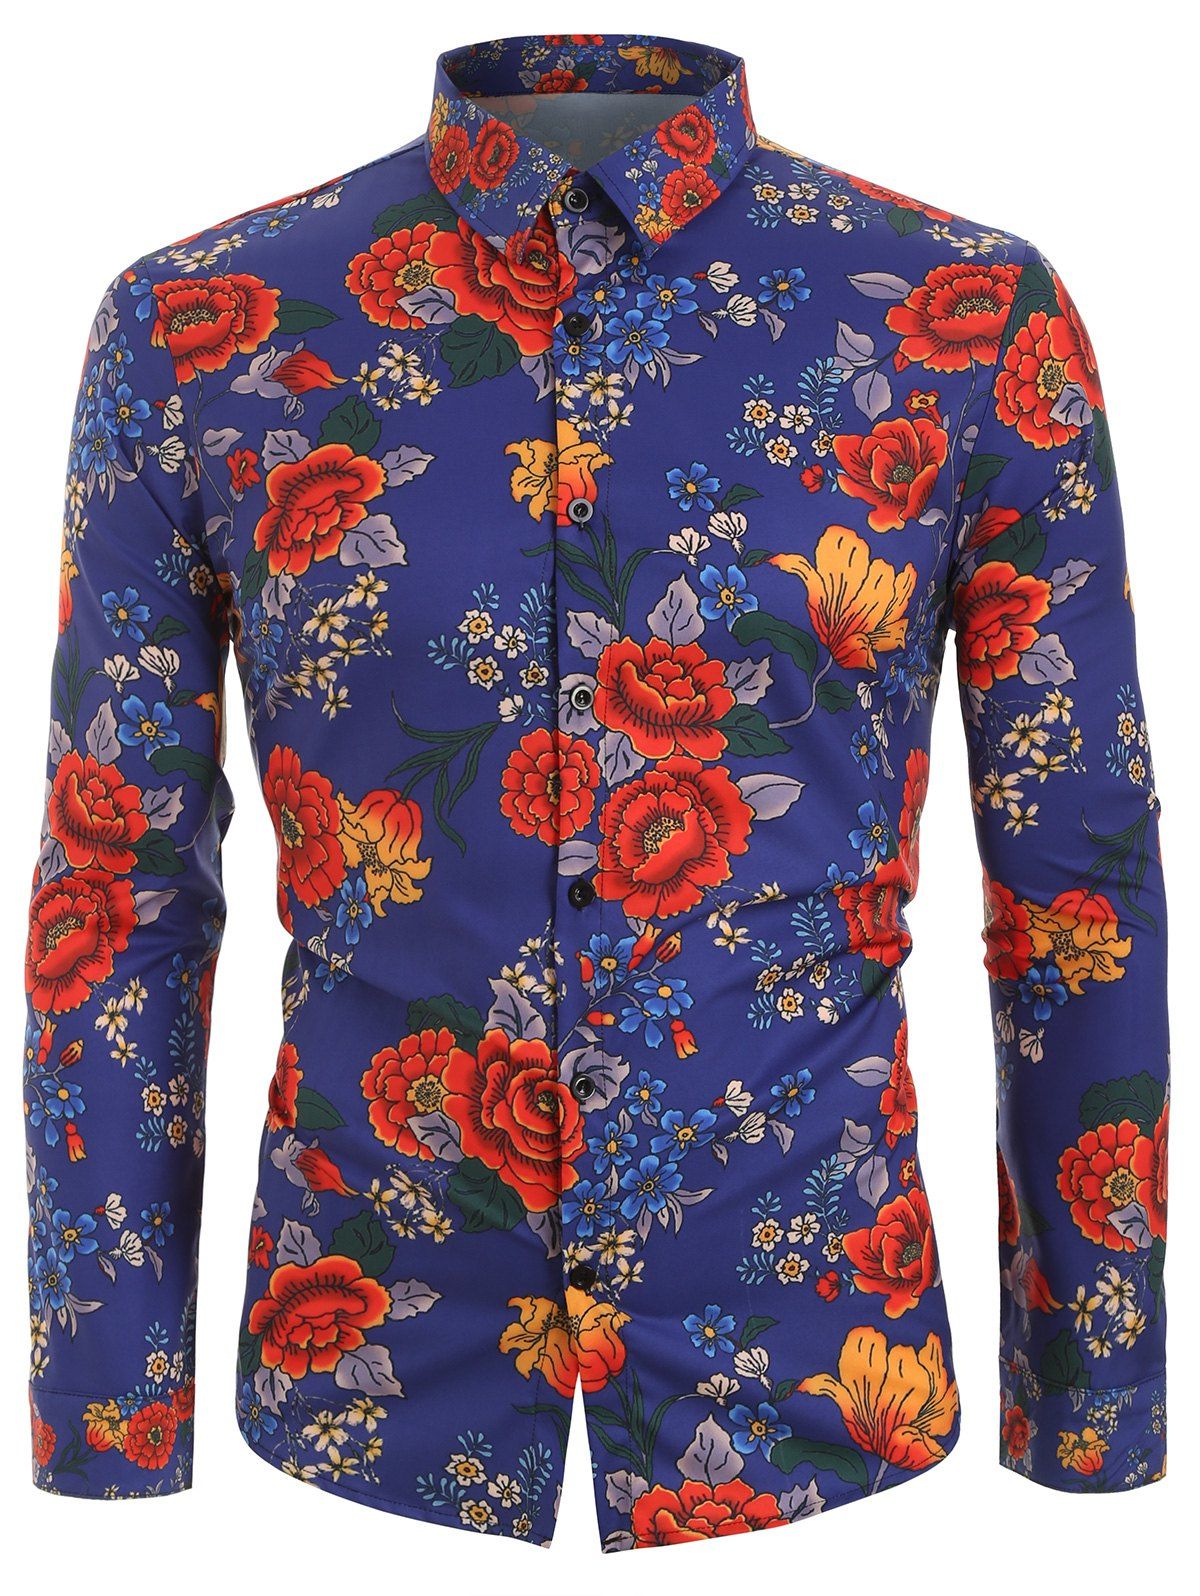 [41% OFF] 2020 Flower Print Long Sleeves Casual Shirt In CADETBLUE ...